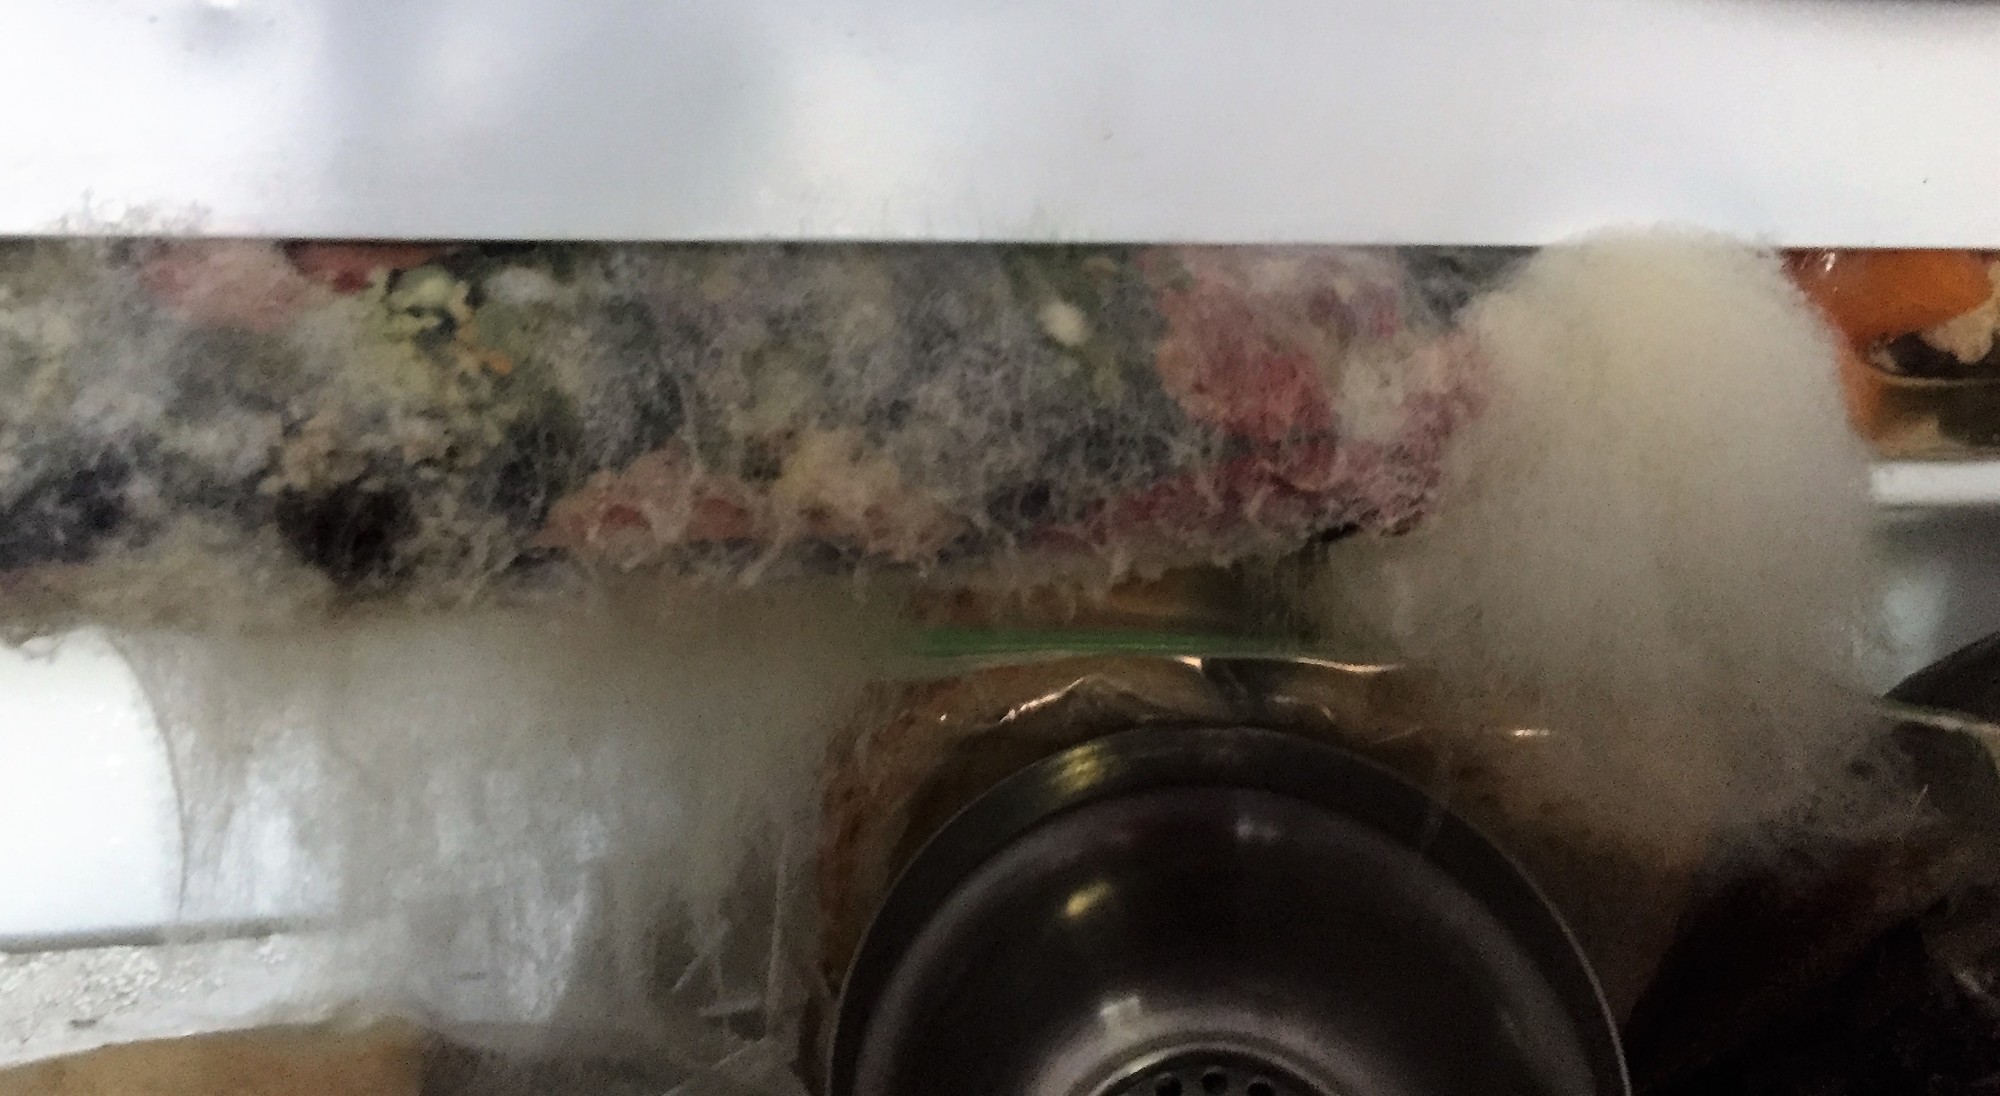 Fuzzy, gray mold grows on the refrigerator inside Arnold’s home in the St. Nicholas area.